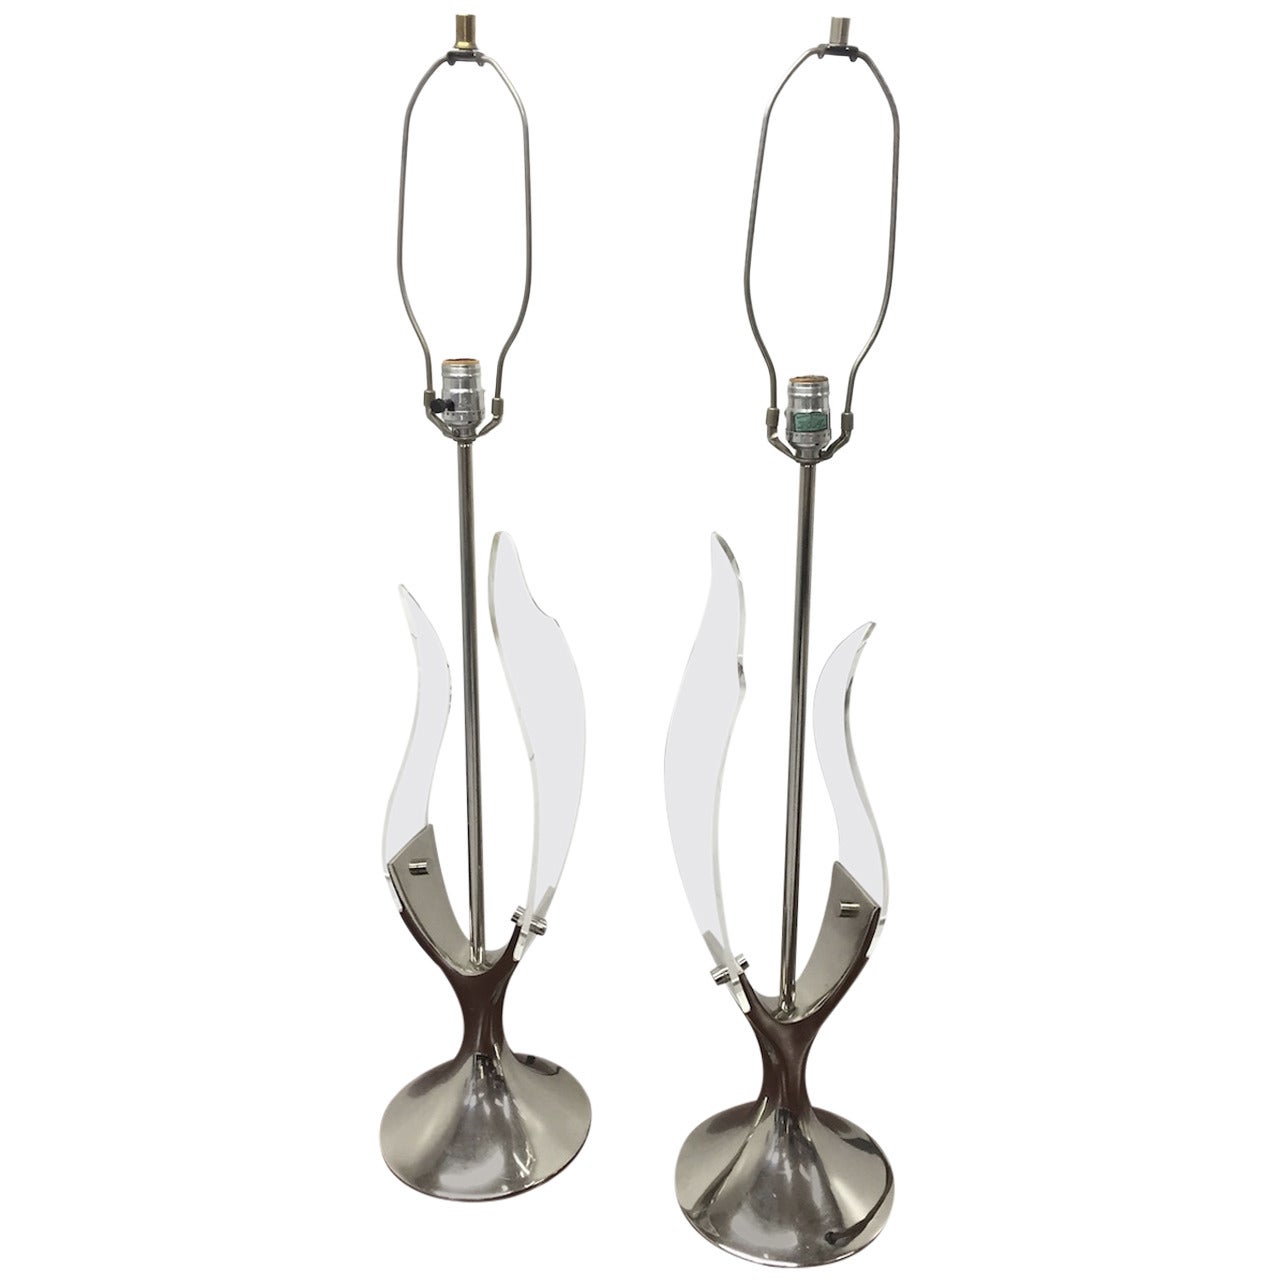 Exceptional Pair of Chrome and Lucite Table Lamps by Laurel Lamp Co. For Sale